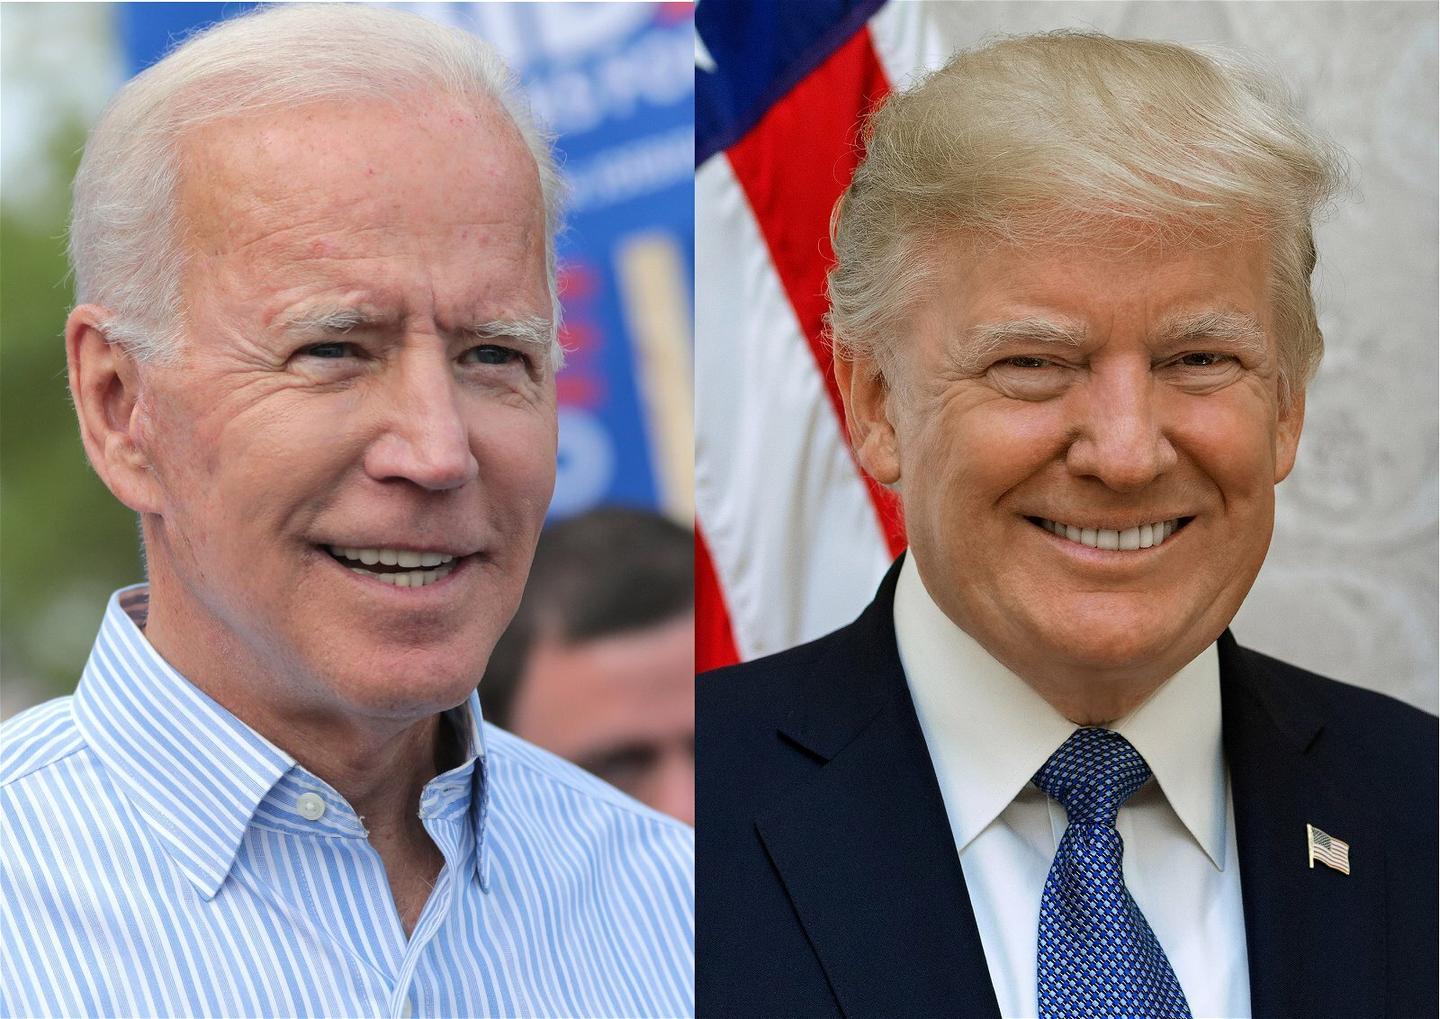 Most Americans plan to watch Biden-Trump debate, and many see high stakes, AP-NORC poll finds